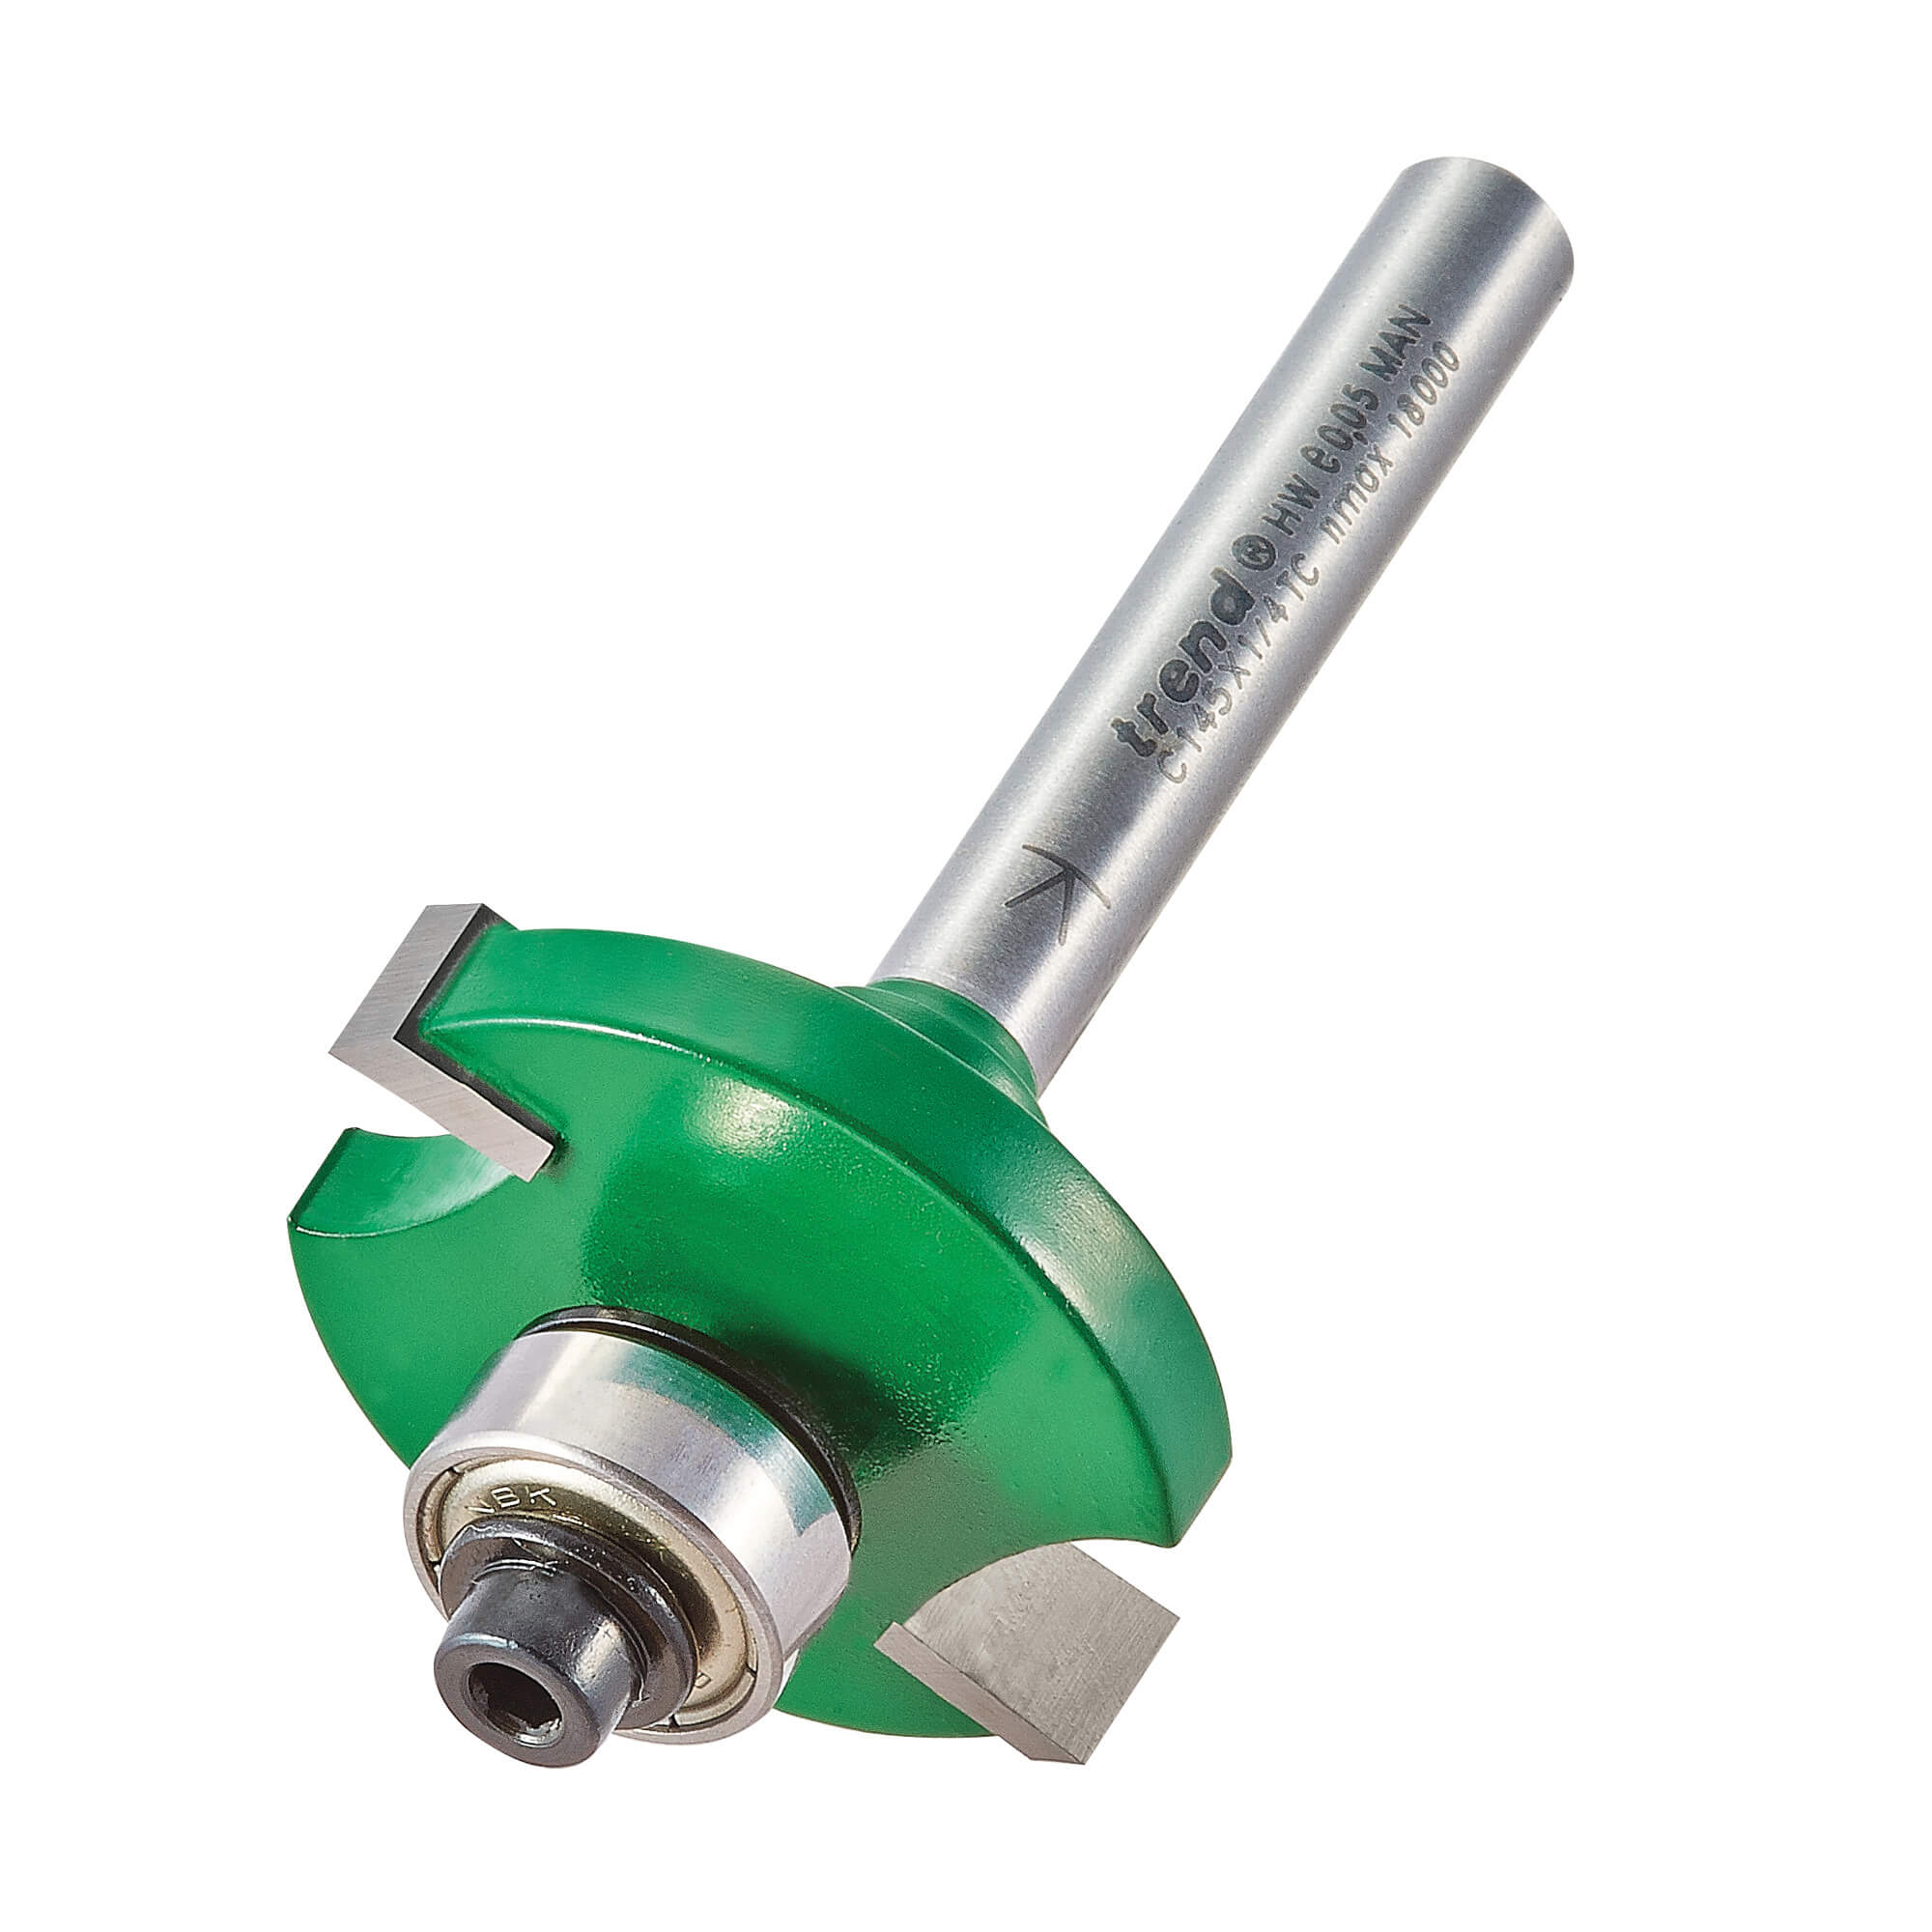 Image of Trend CRAFTPRO One Piece Slotting Router Cutter 6.3mm 31.8mm 1/4"